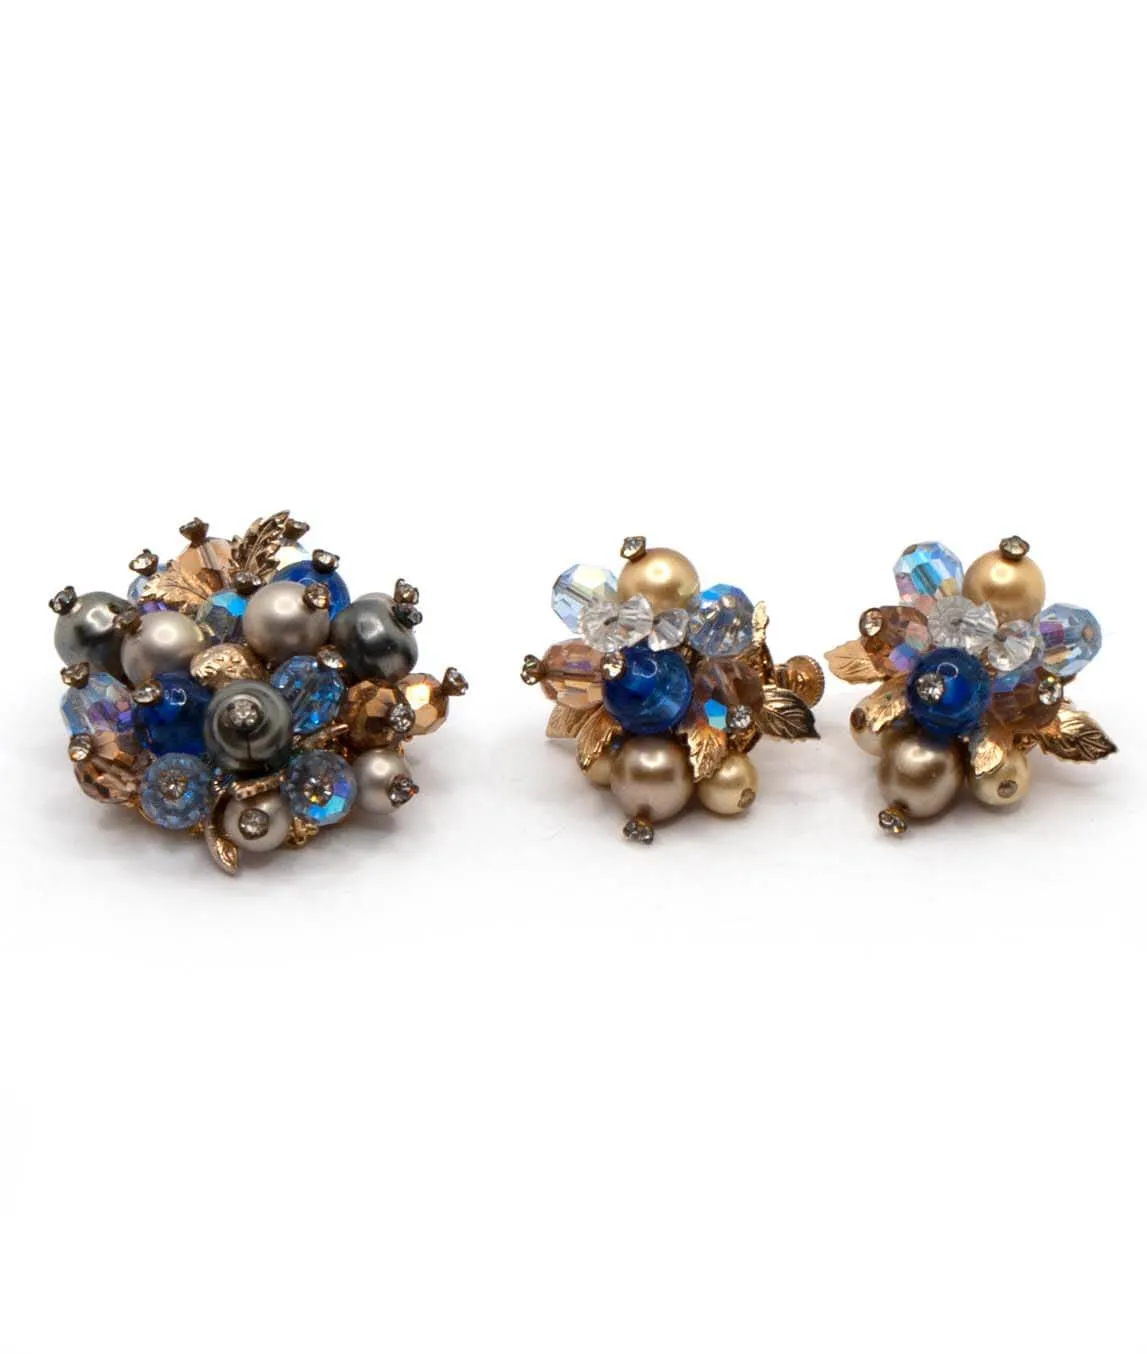 Vintage Vendôme brooch and earrings constructed from gold painted and blue faceted beads with rhinestones